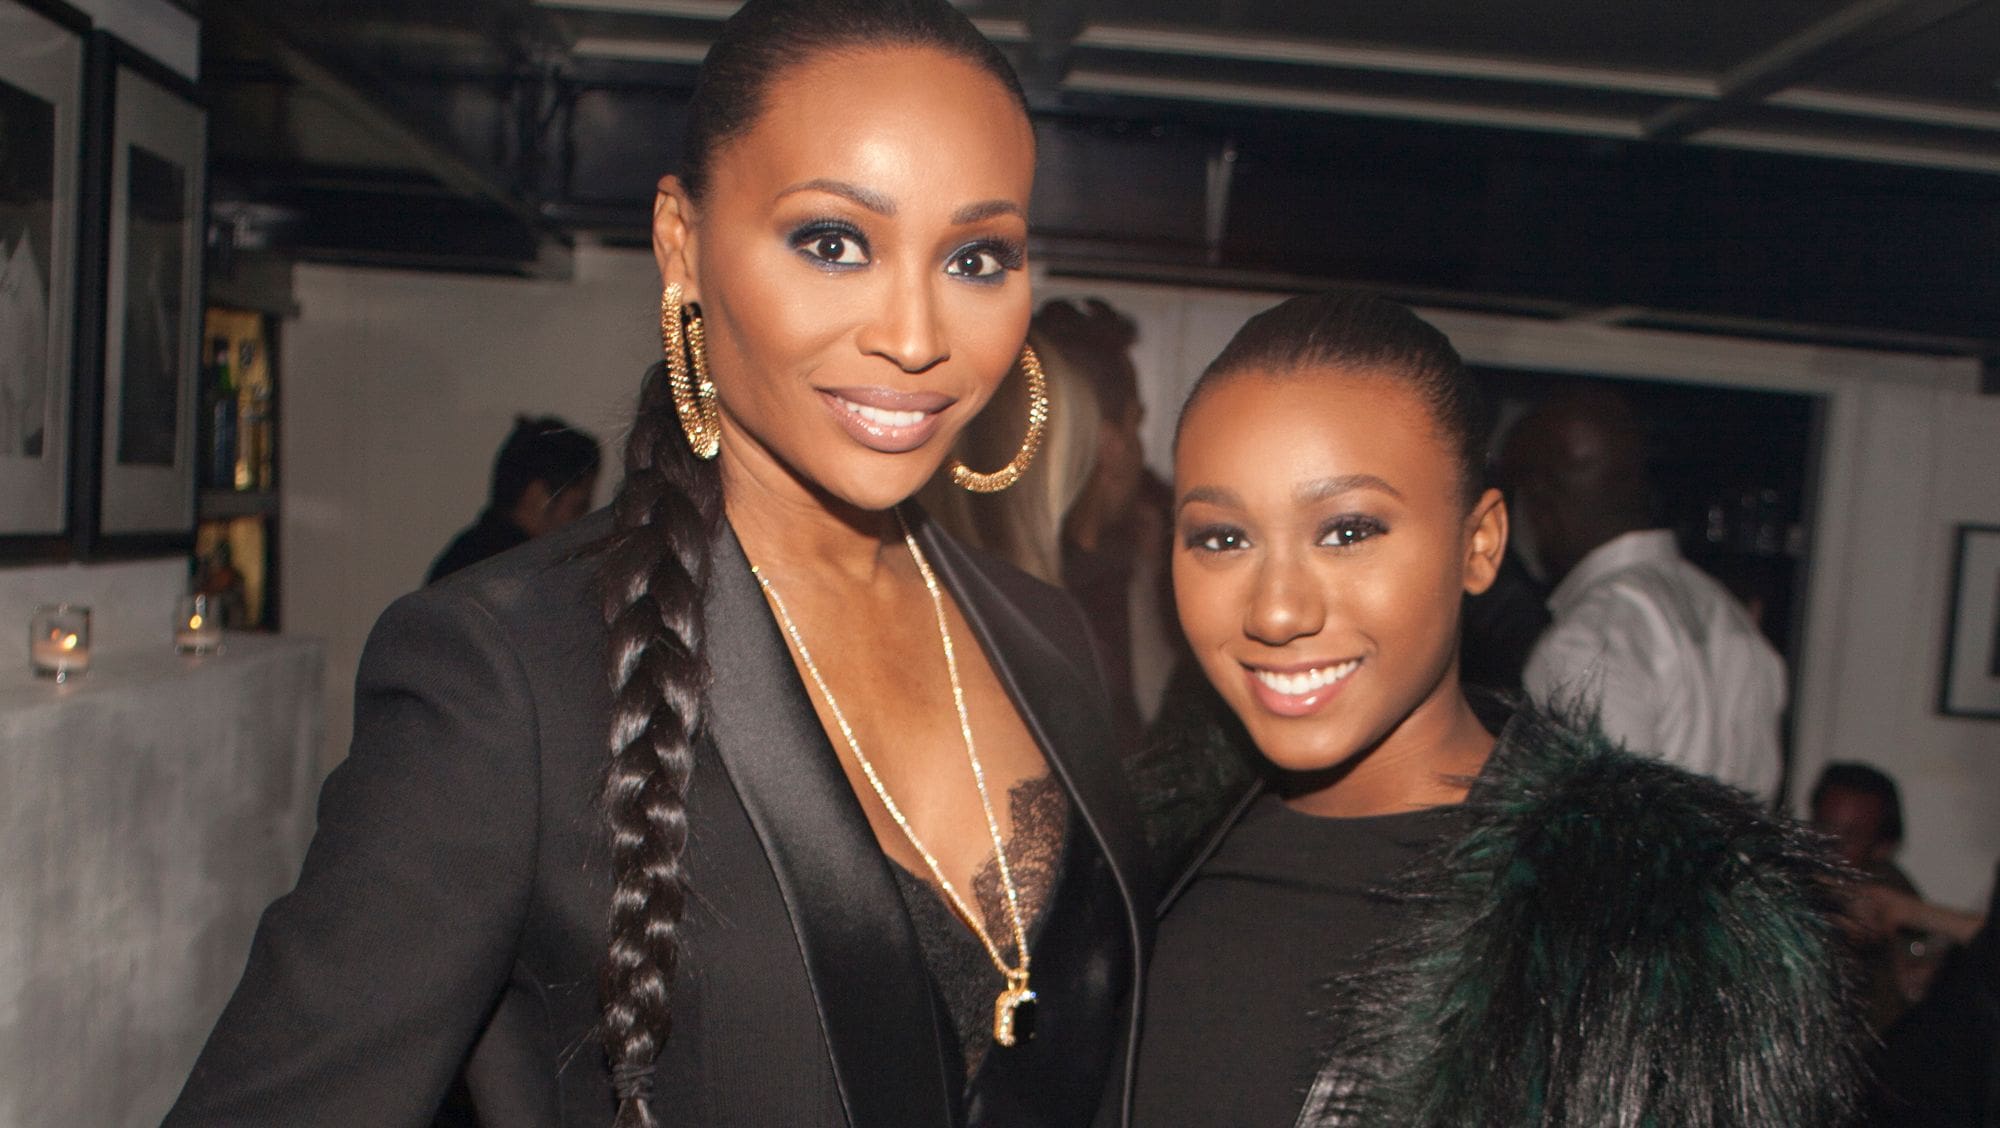 Cynthia Bailey's Paradisiac Video Has Fans Dreaming - Check Out Her Recent Post